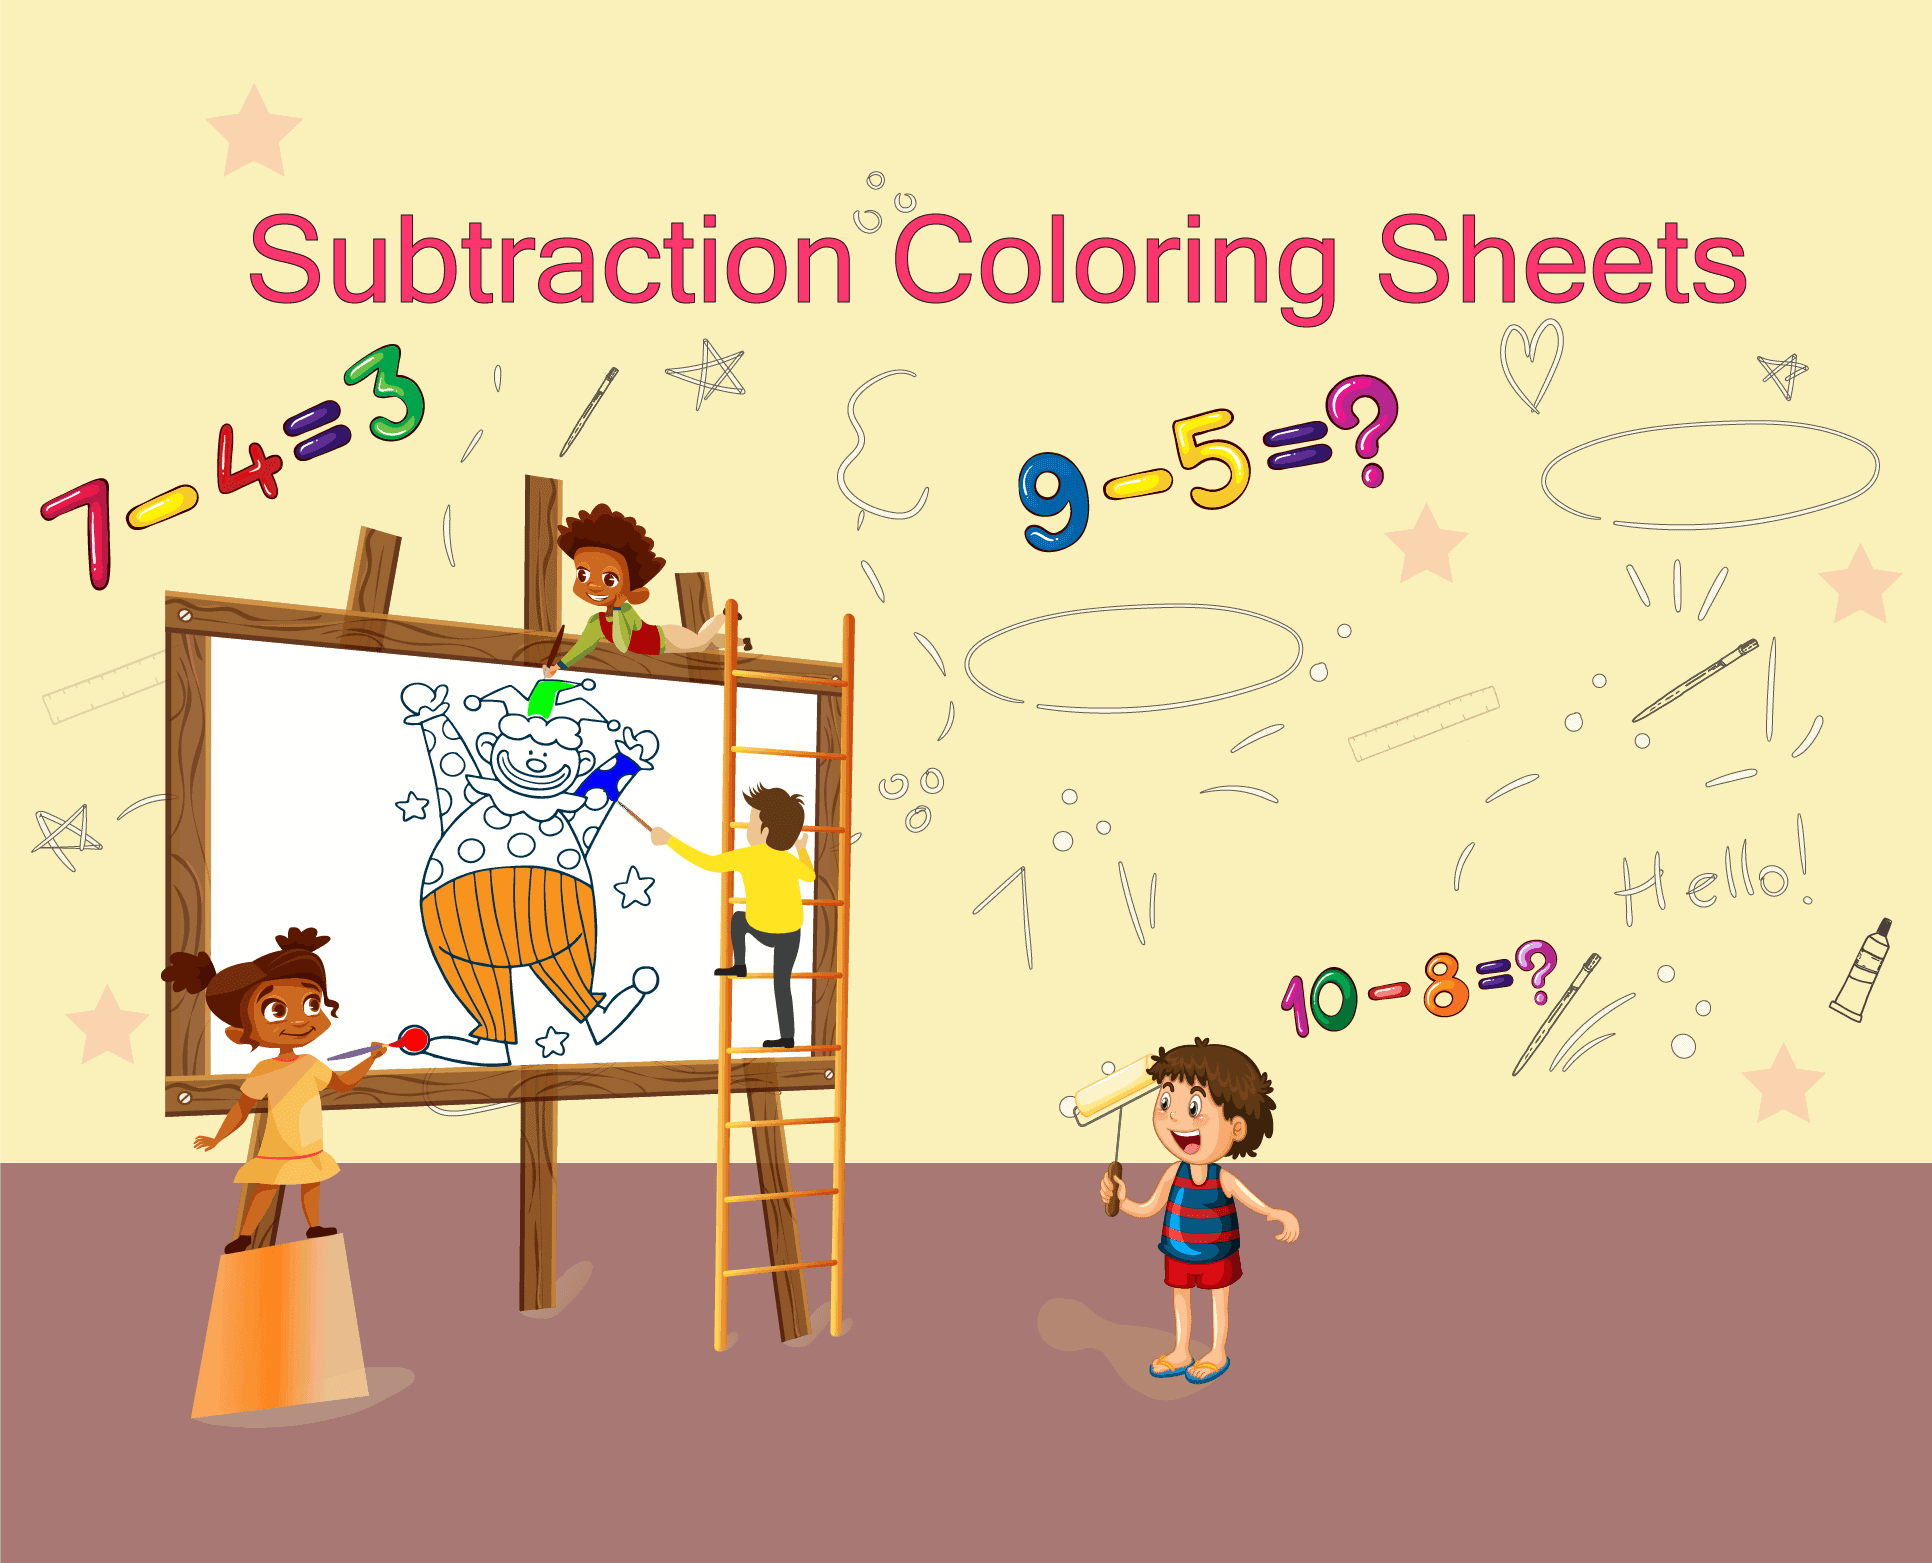 Children are coloring subtraction coloring sheets